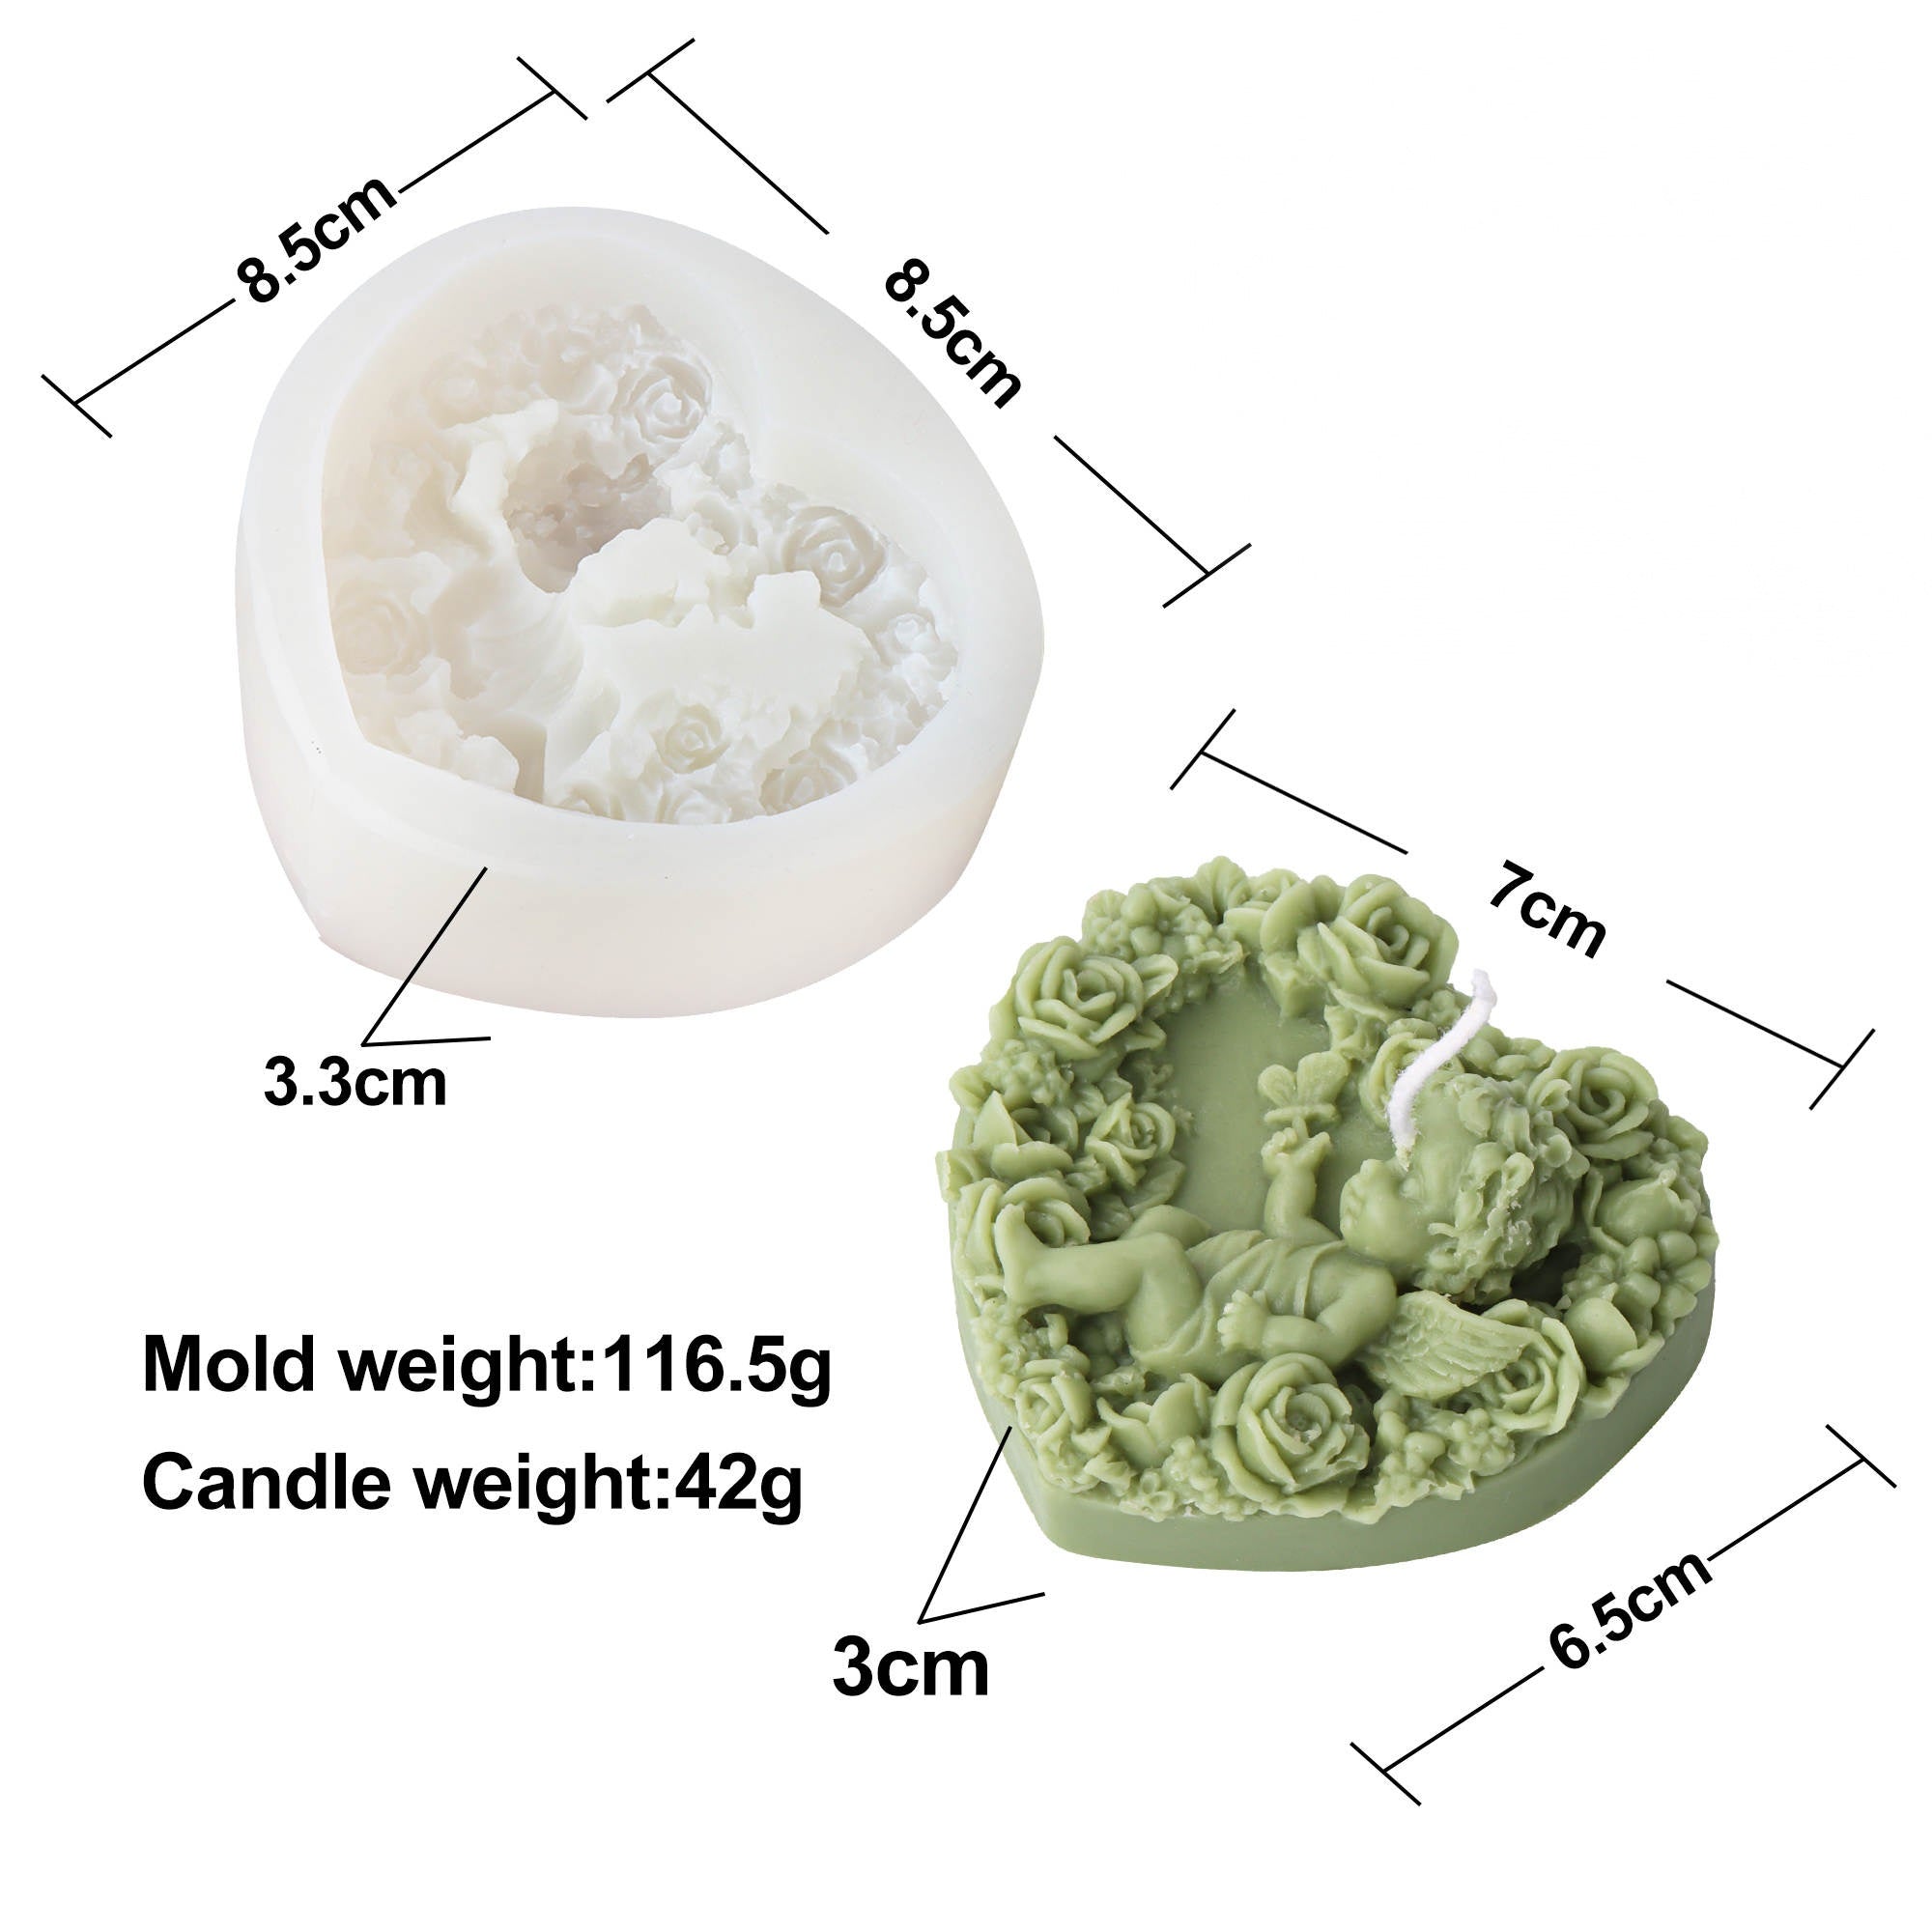 Cupid Candle Mould 3 - Silicone Mould, Mold for DIY Candles. Created using candle making kit with cotton candle wicks and candle colour chips. Using soy wax for pillar candles. Sold by Myka Candles Moulds Australia